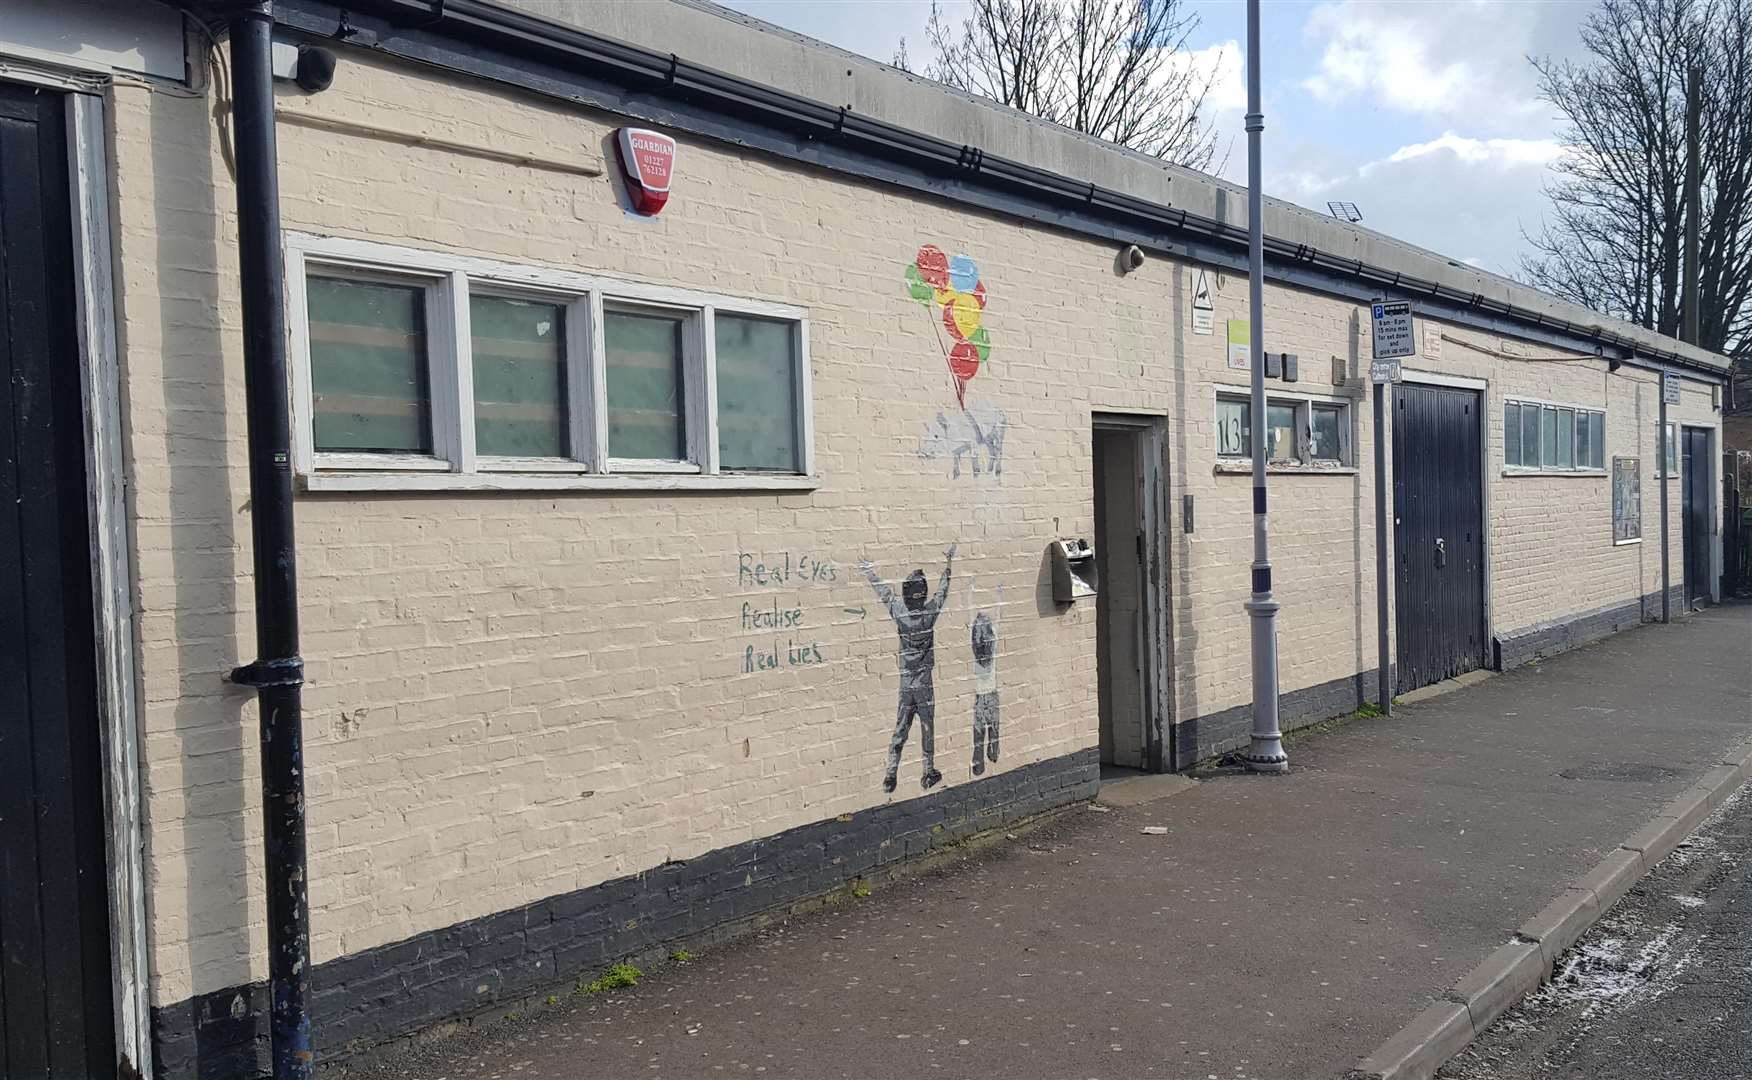 The Catching Lives day centre in Station Road East, Canterbury, helps homeless people get back on their feet